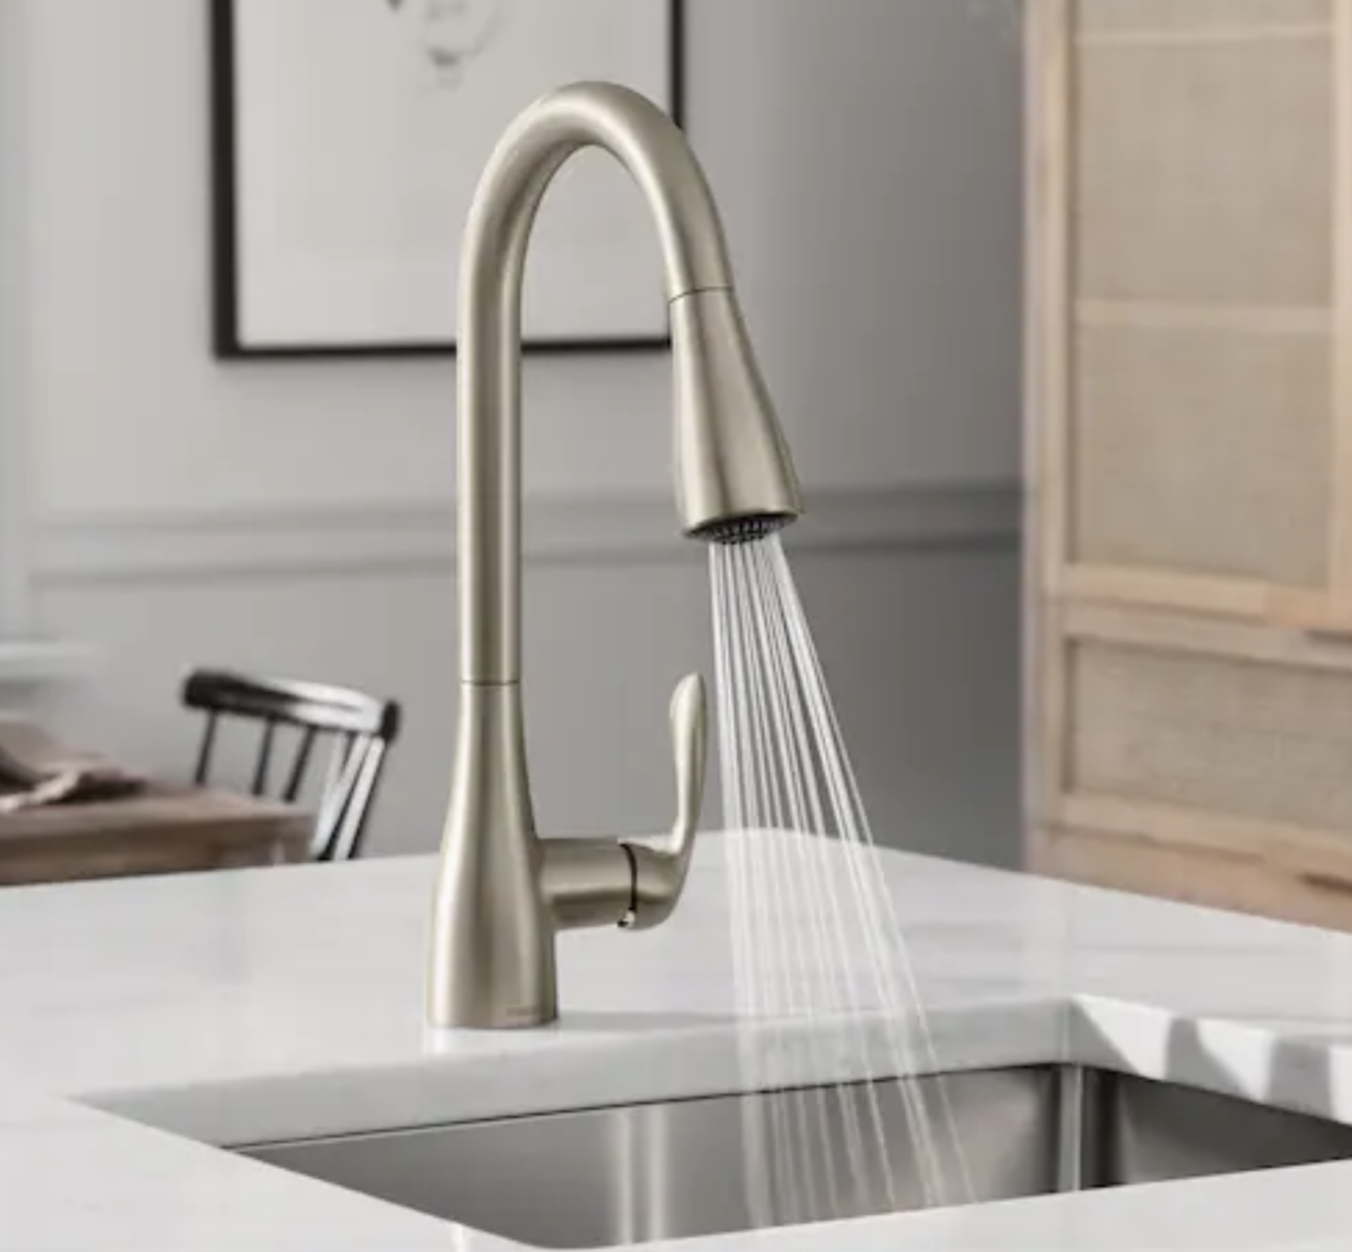 Curved faucet spraying into a sink